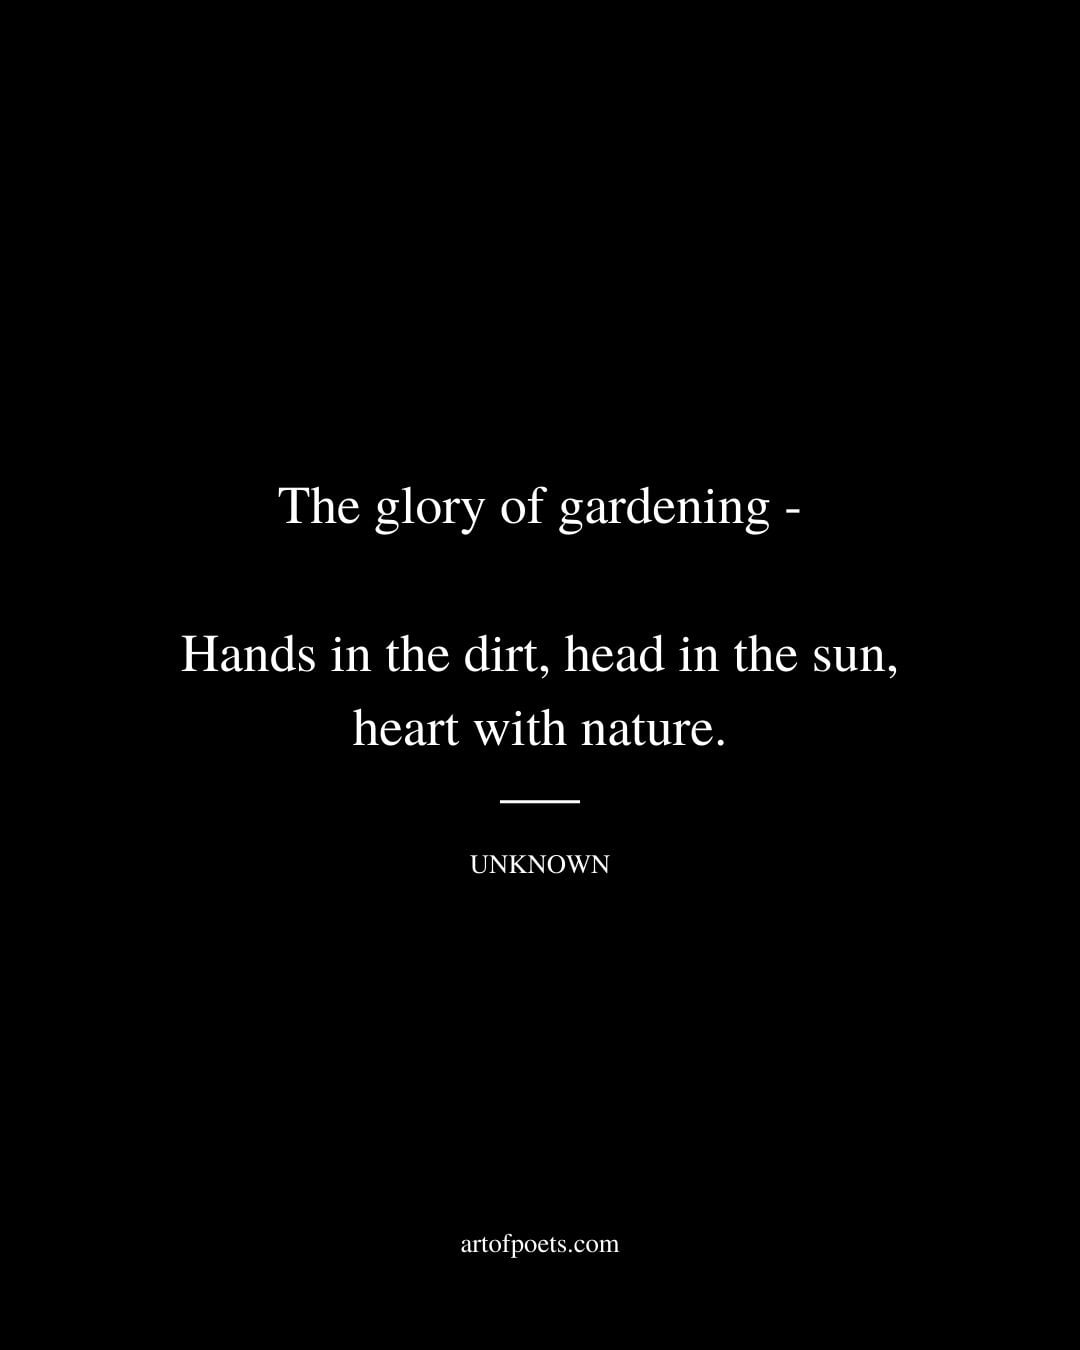 The glory of gardening—Hands in the dirt head in the sun heart with nature. Unknown